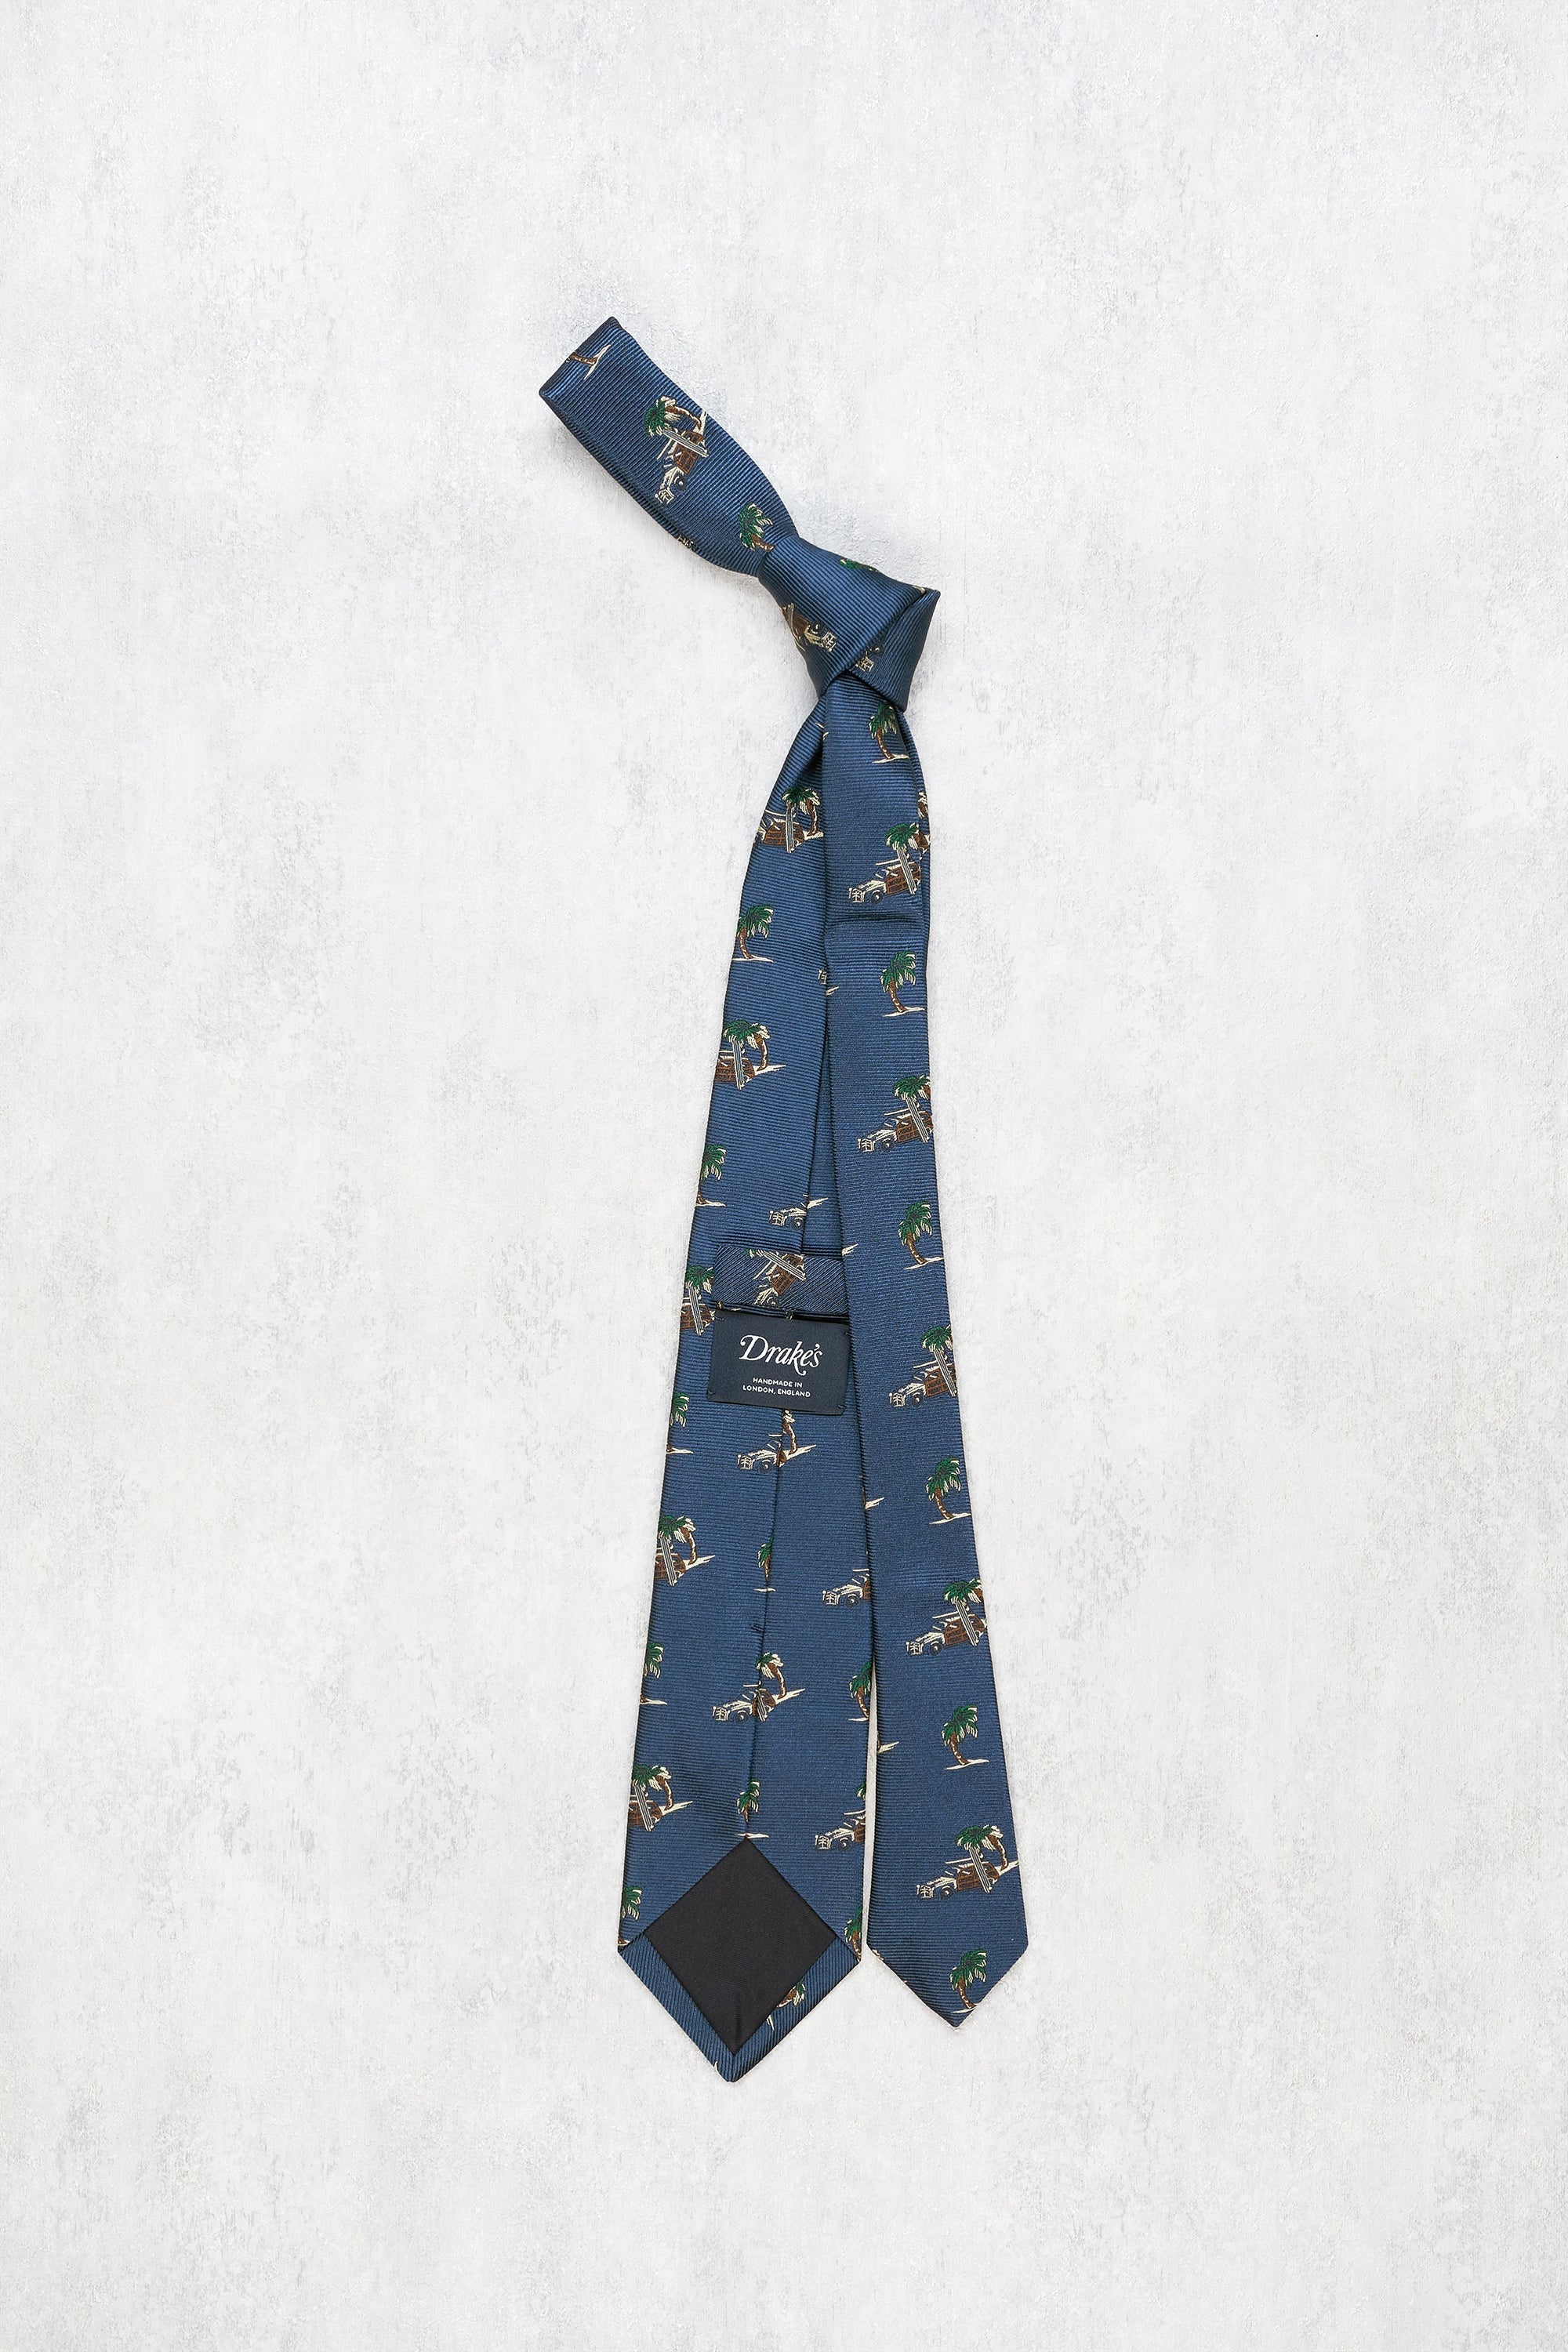 Drake's Blue with Car and Tree Pattern Silk Tie